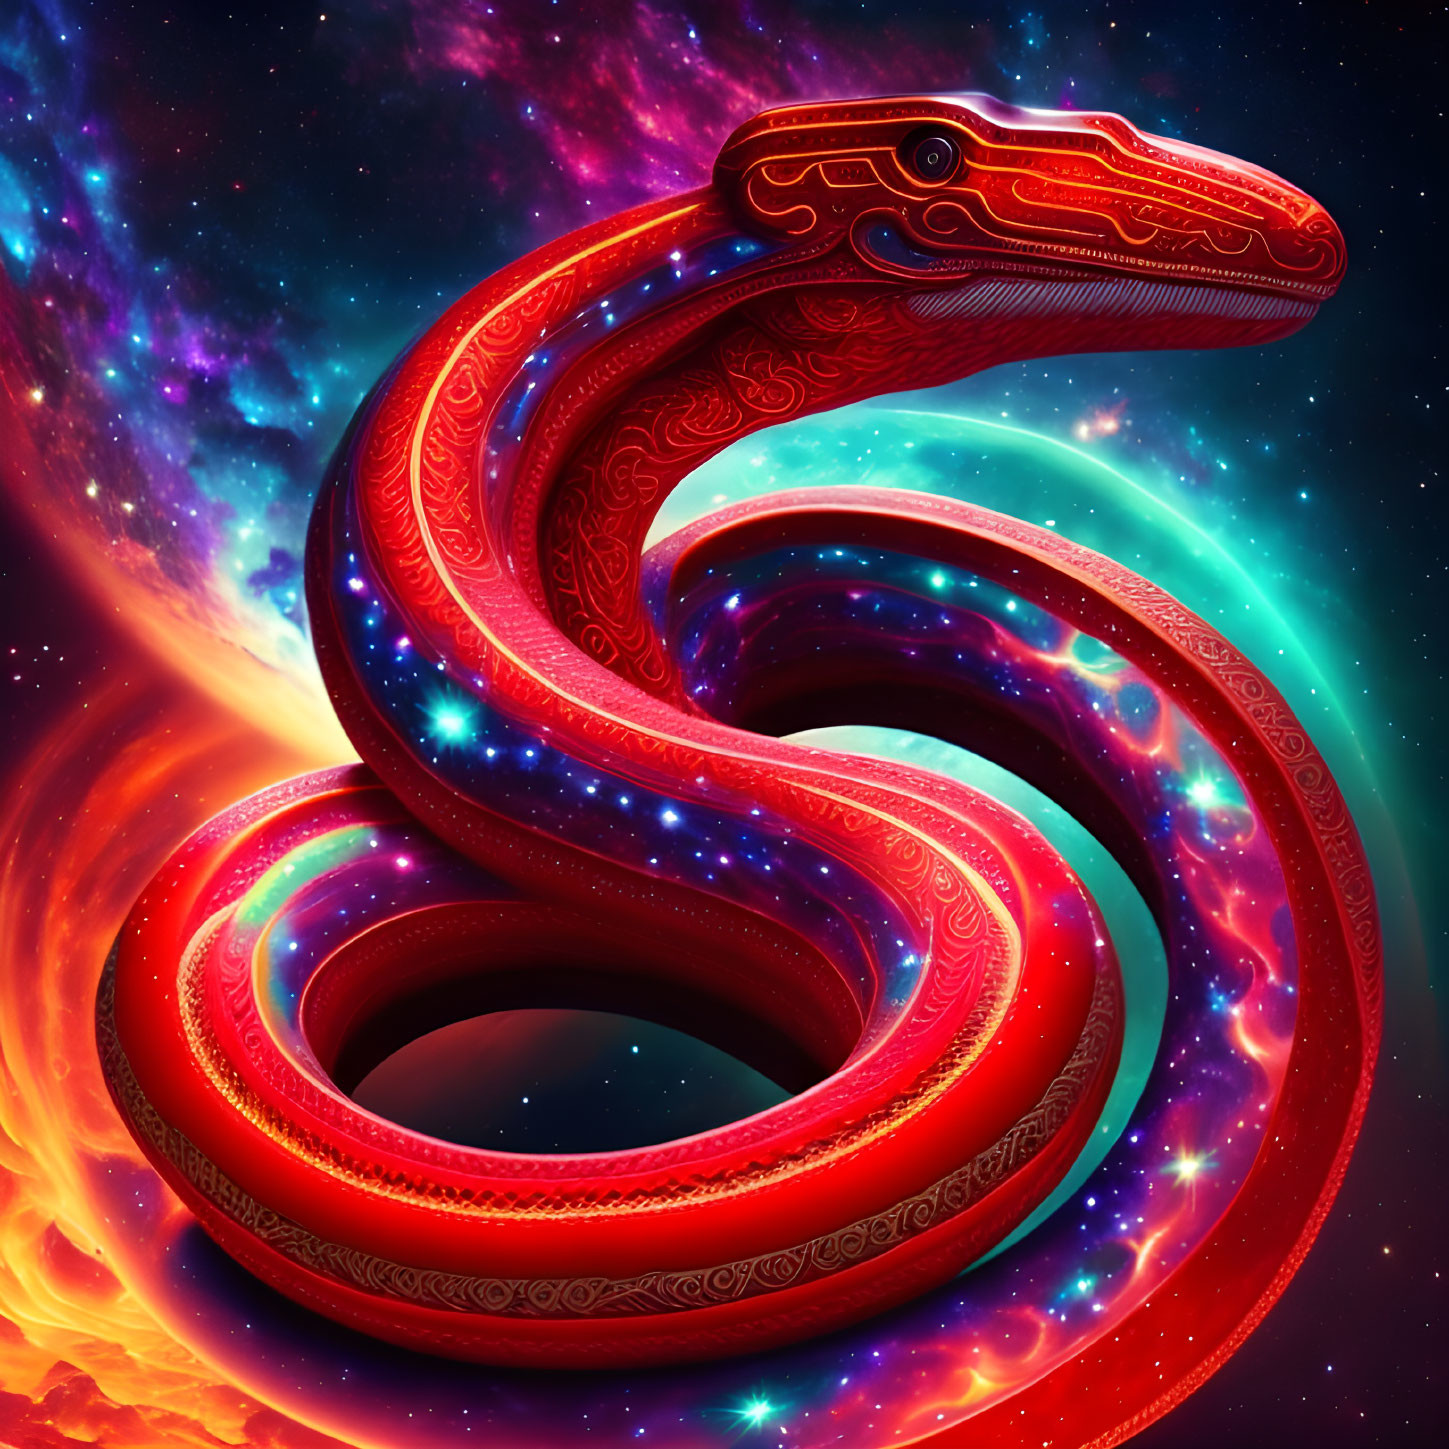 Colorful Serpent-like Creature in Cosmic Space with Stars and Nebulae